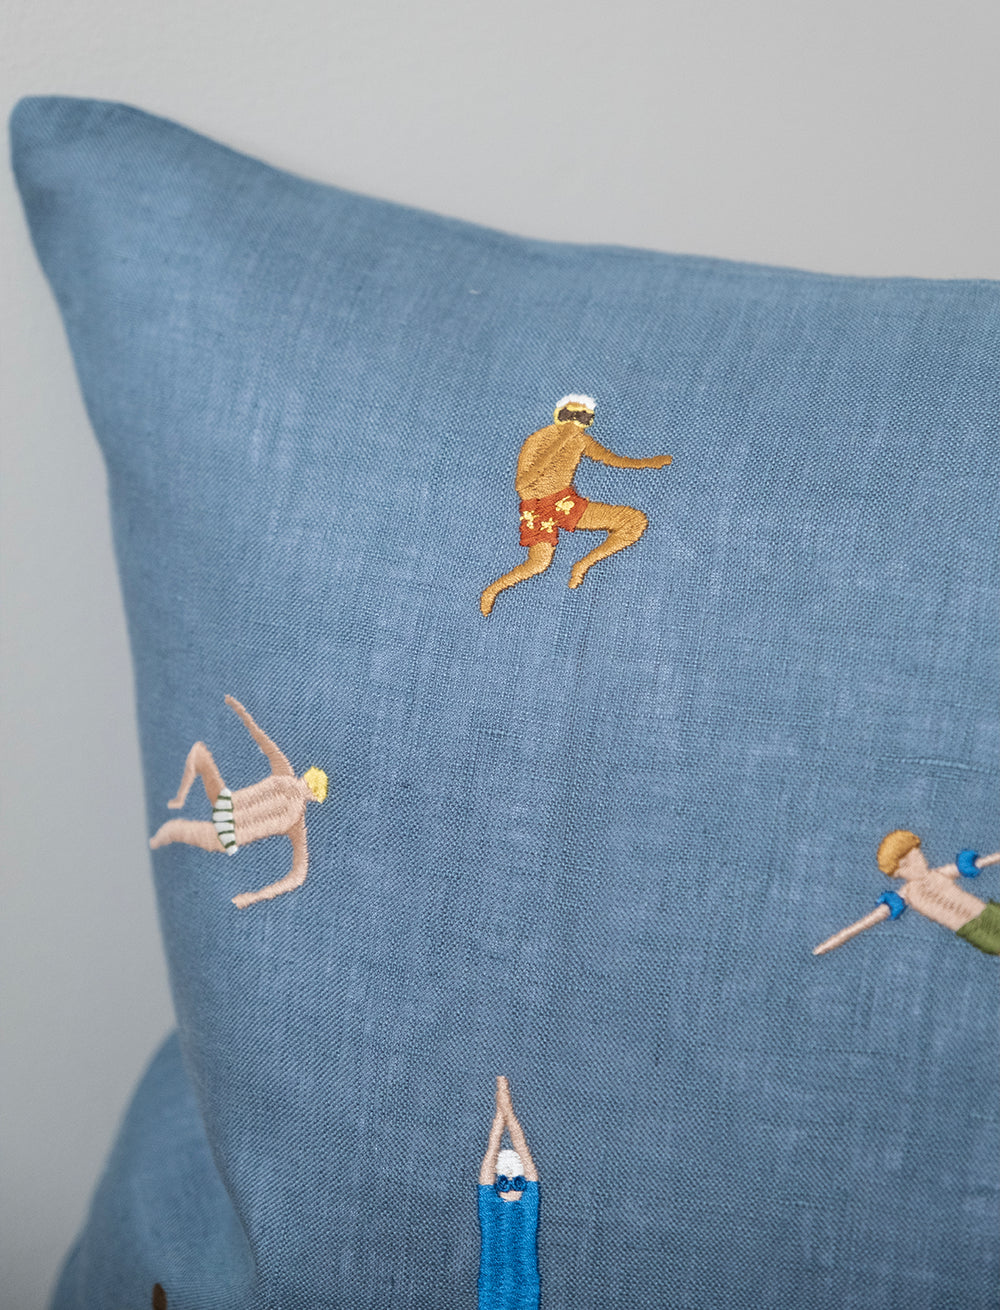 Swimmers Embroidered Cushion COVER in Blue Linen